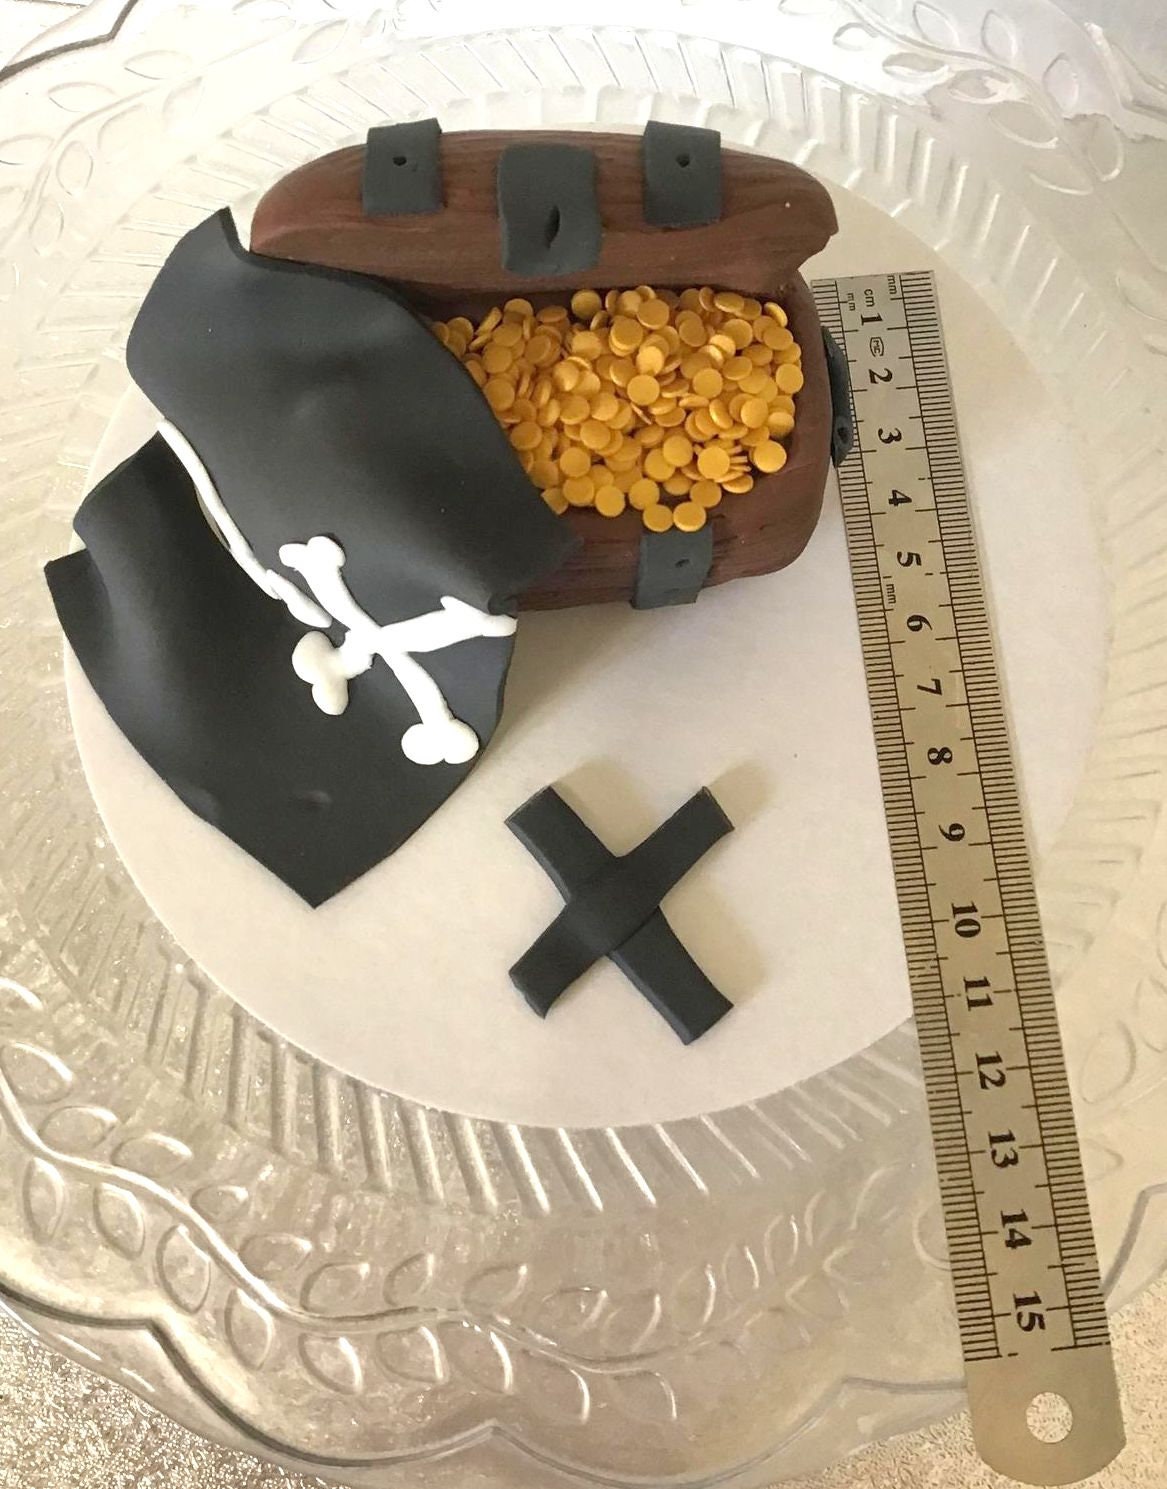 Handmade edible sugar Pirate treasure chest with Jolly roger flag and miniature gold coins